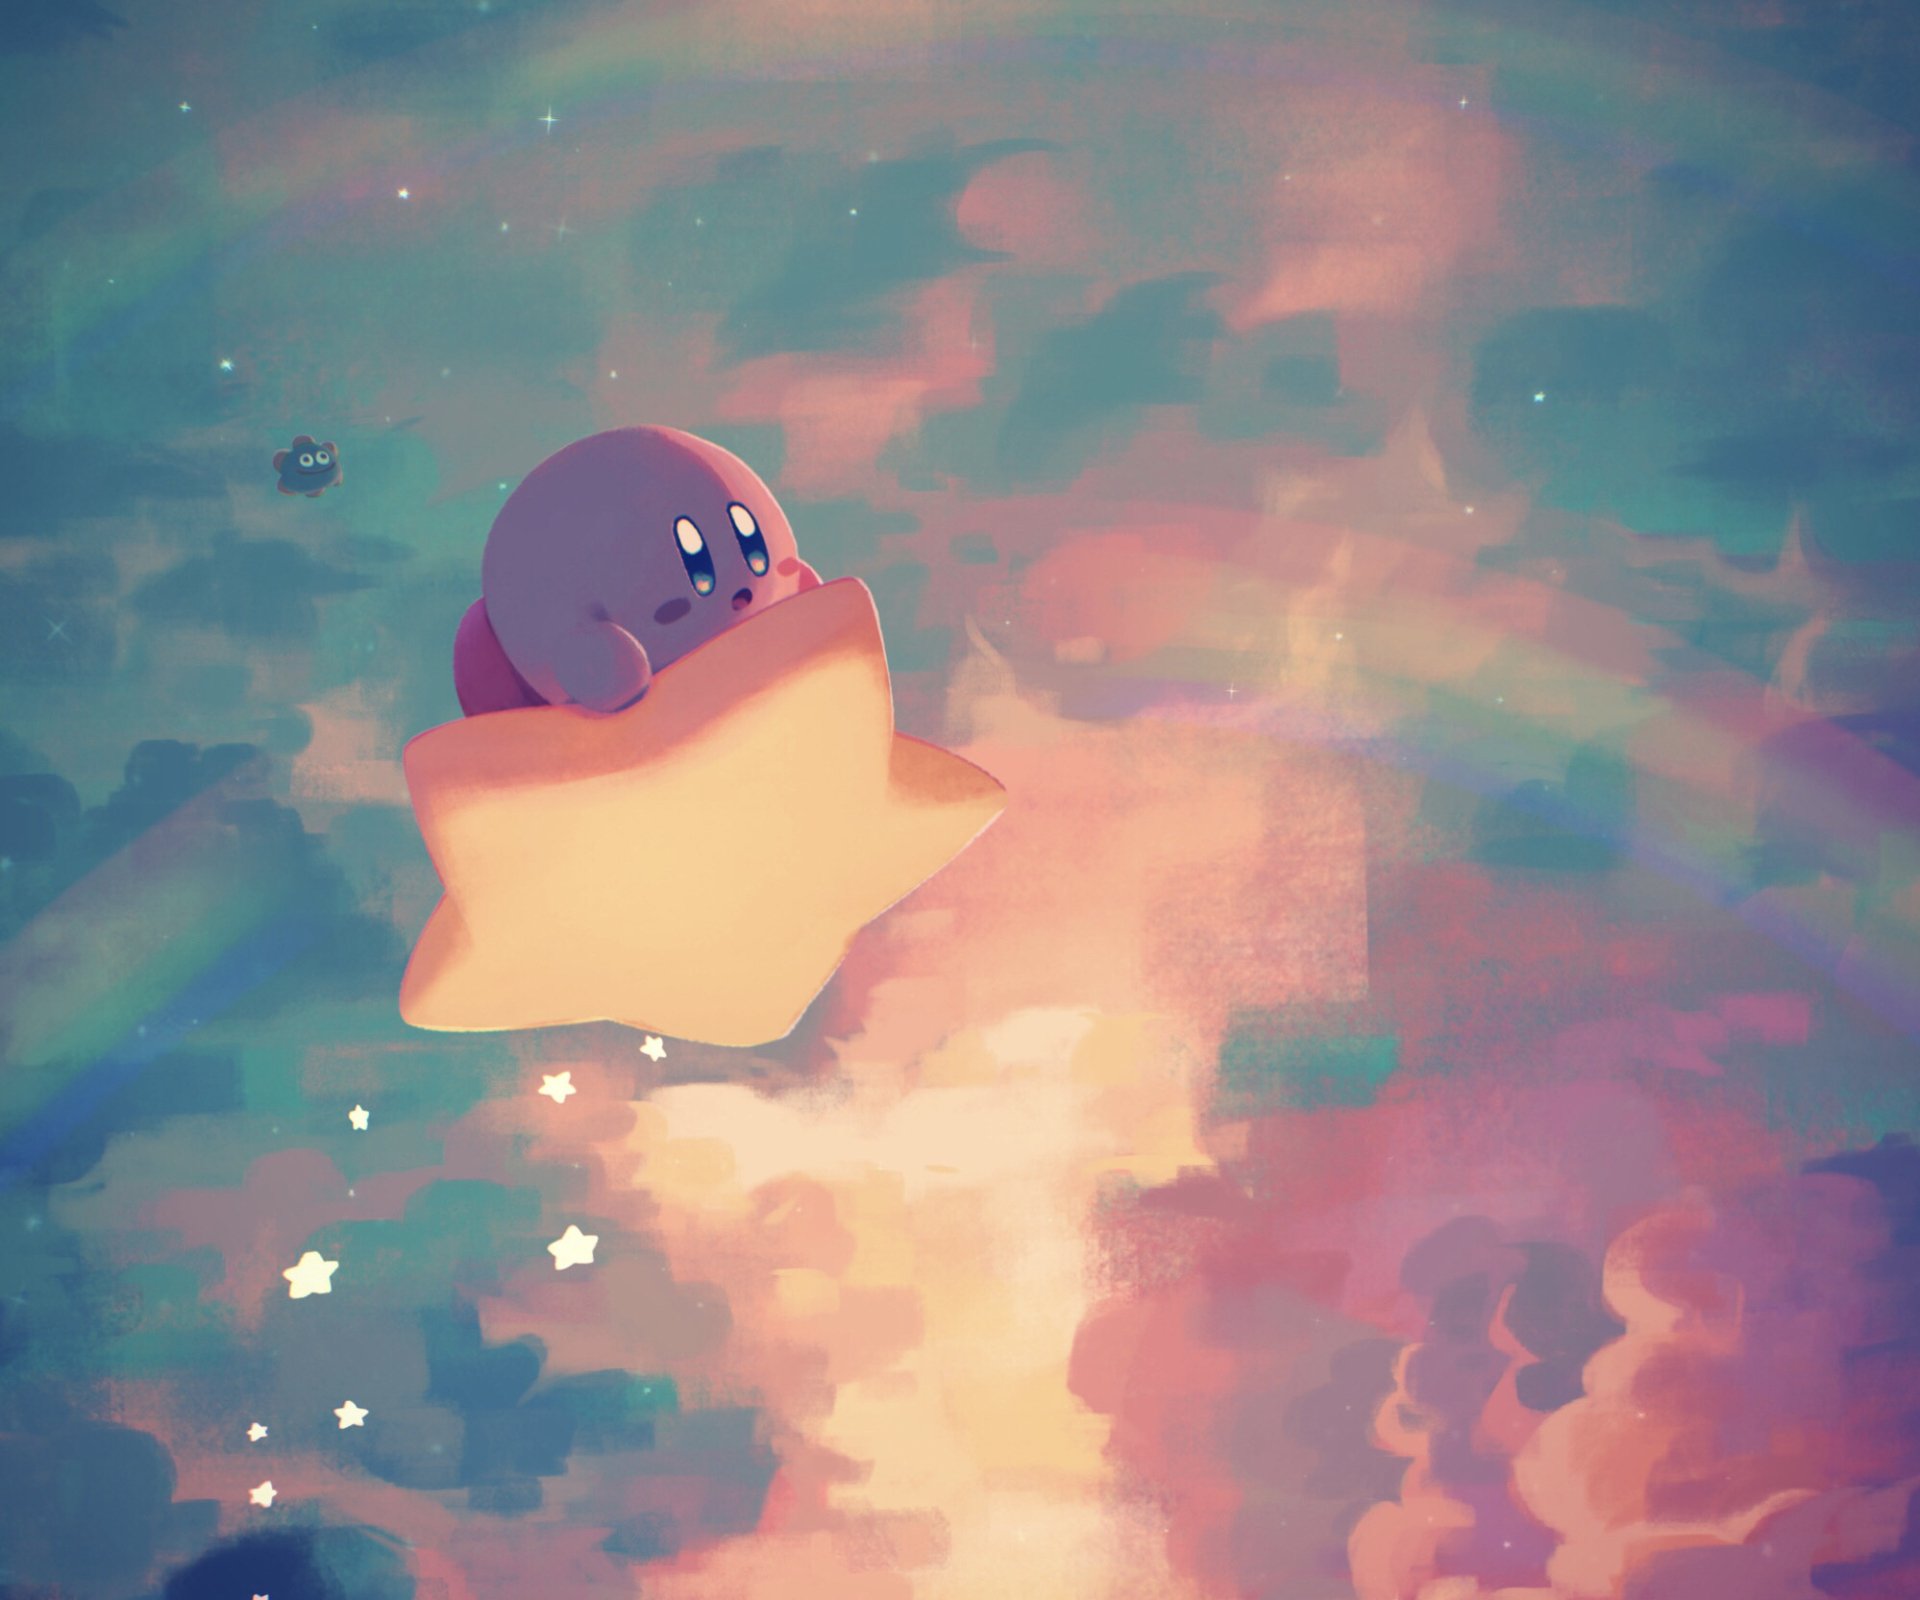 Kirby Phone Wallpaper by すびかか - Mobile Abyss